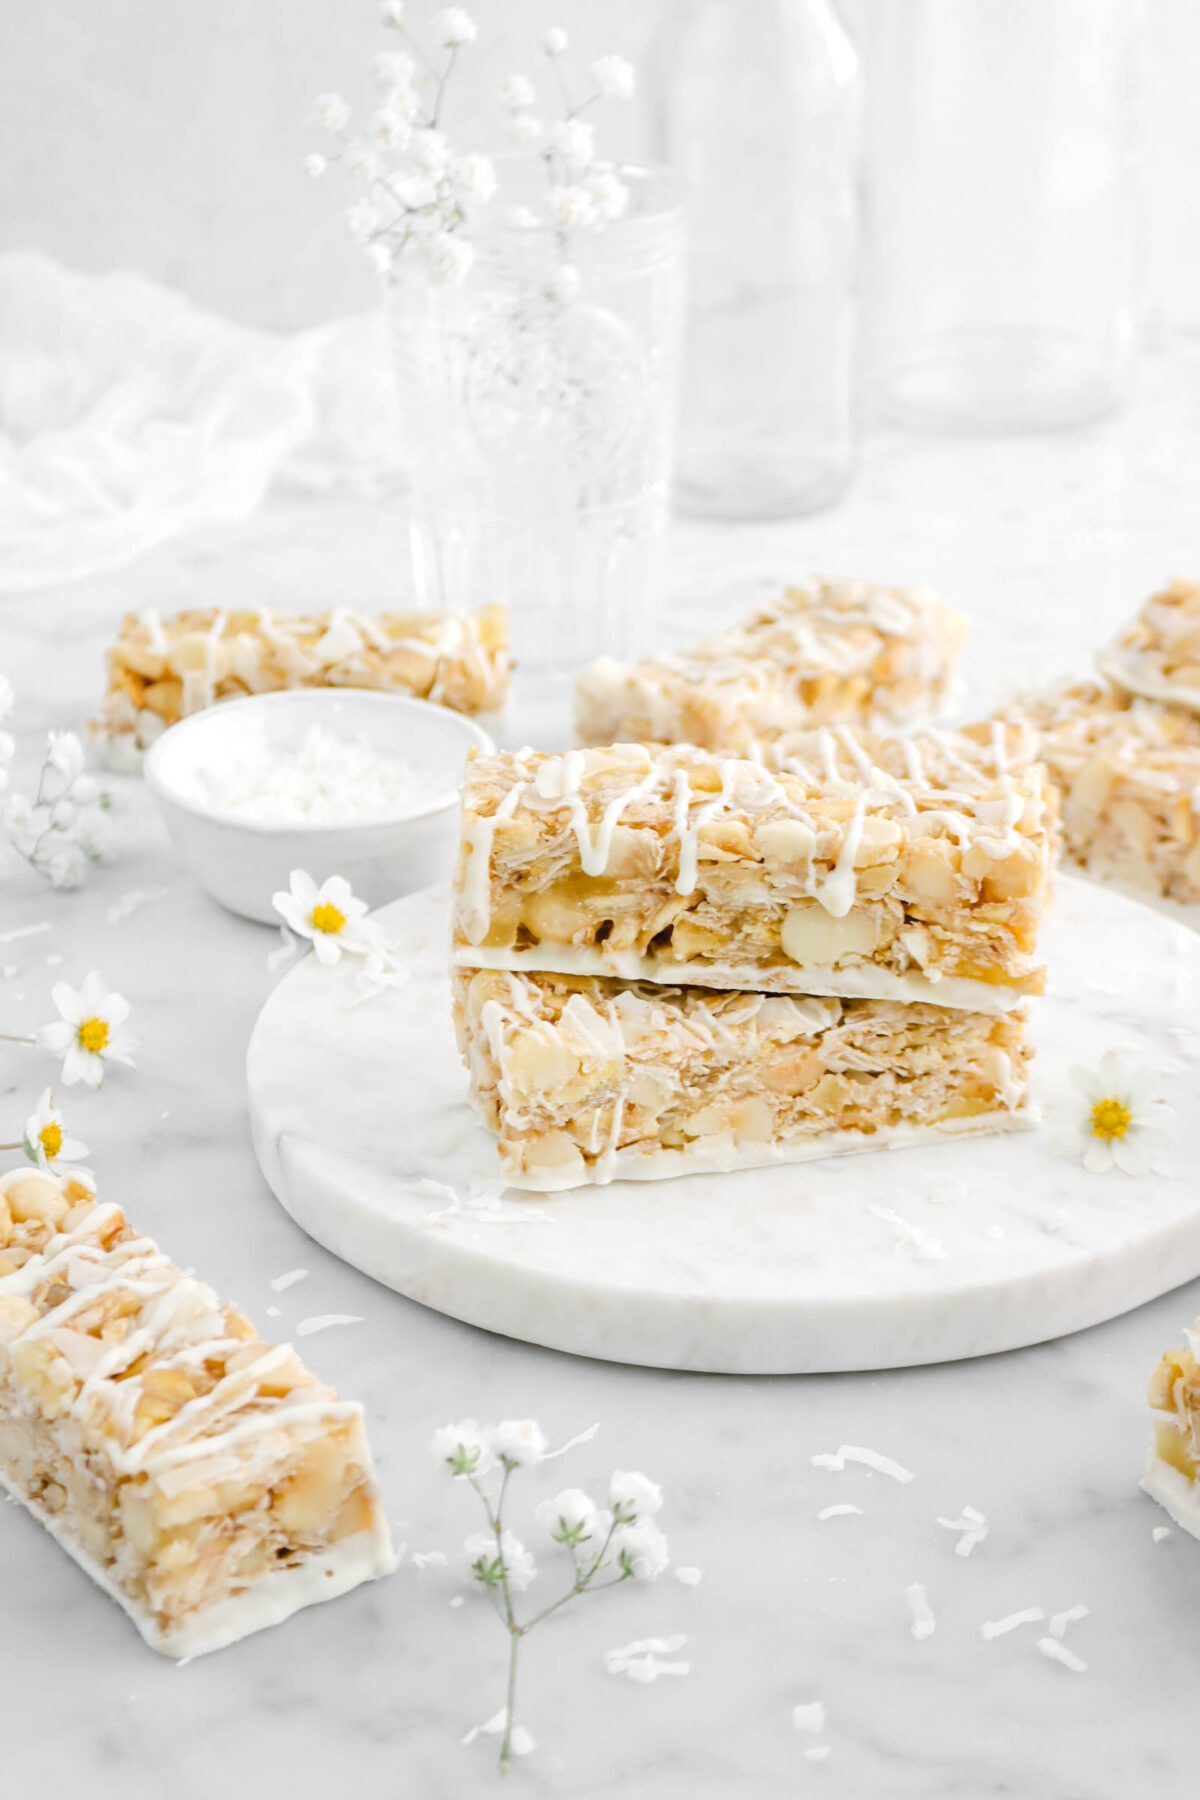 angled shot of two stacked granola bars on marble plate with more granola bars around, flowers, and shredded coconut